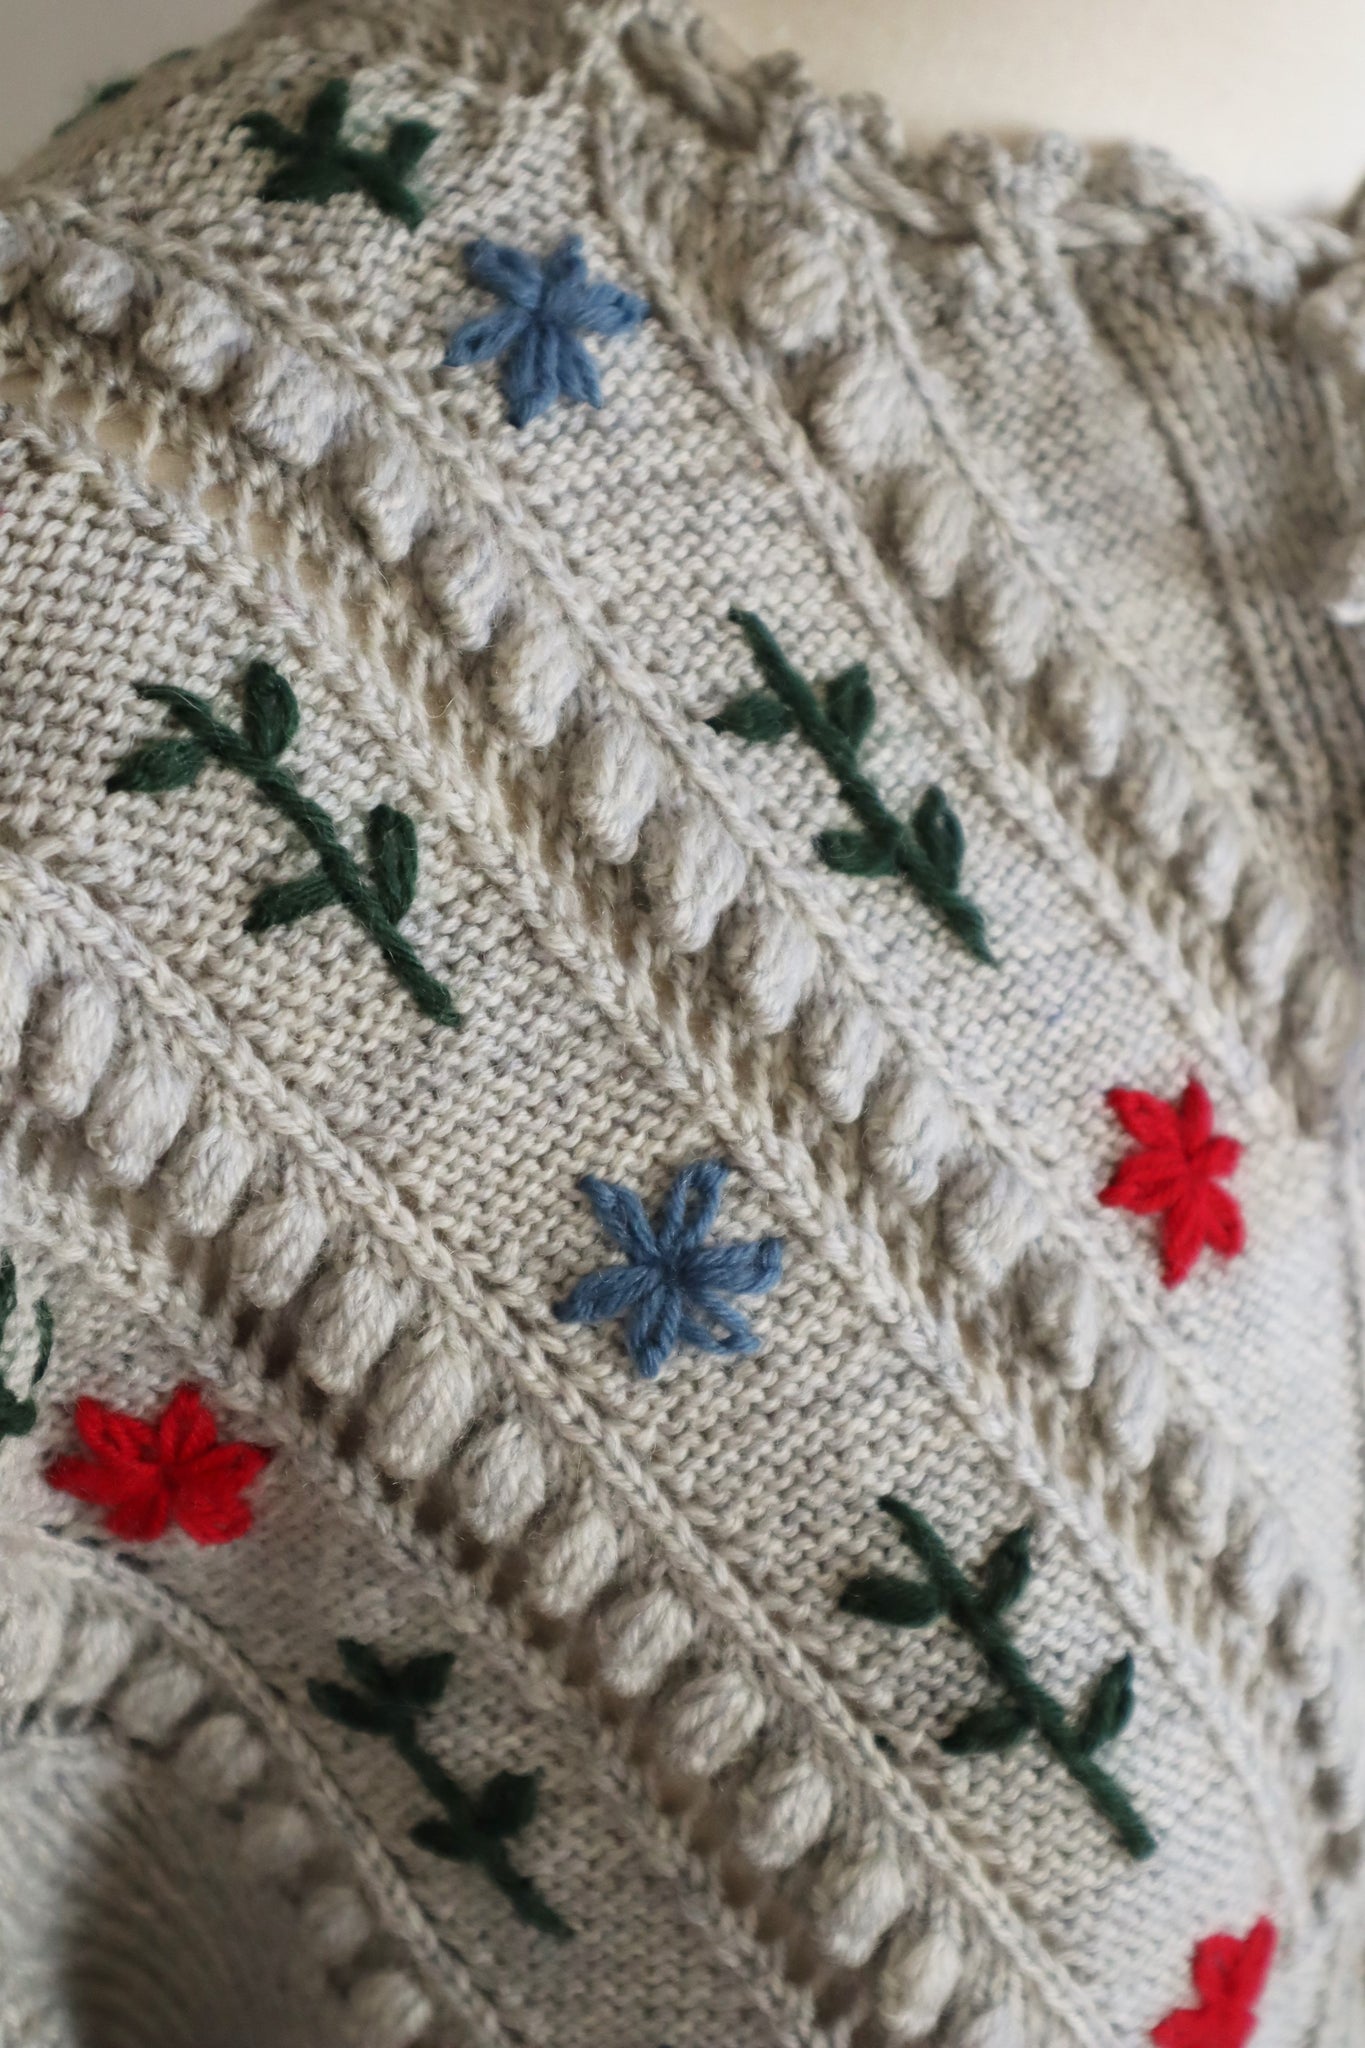 80s Hand-knit Bavarian Flower Embroidered Popcorn Knit Folklore Cardigan Gray